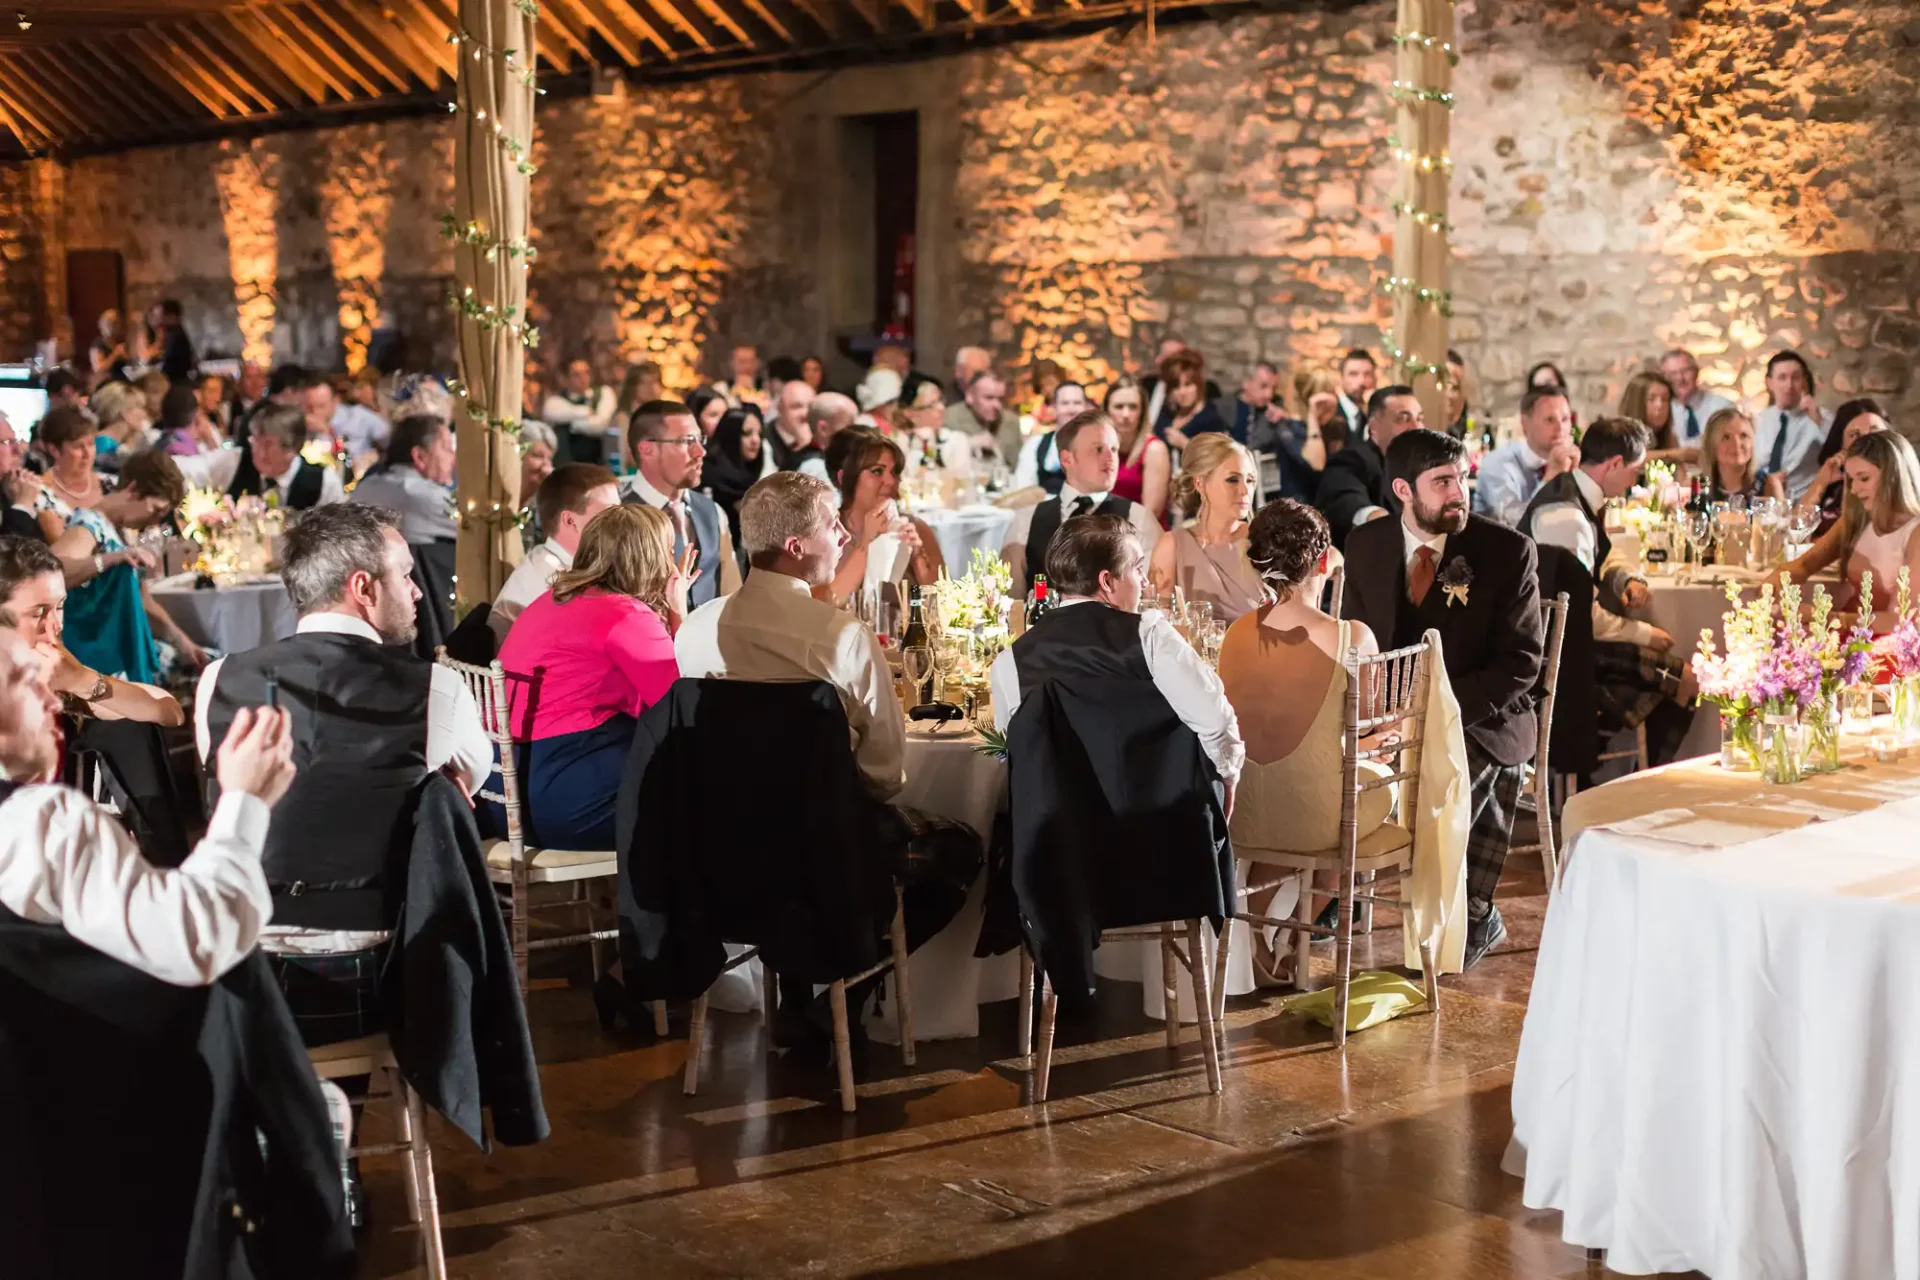 Guests seated at long tables during a wedding reception in a rustic stone hall, decorated with flowers and candles.